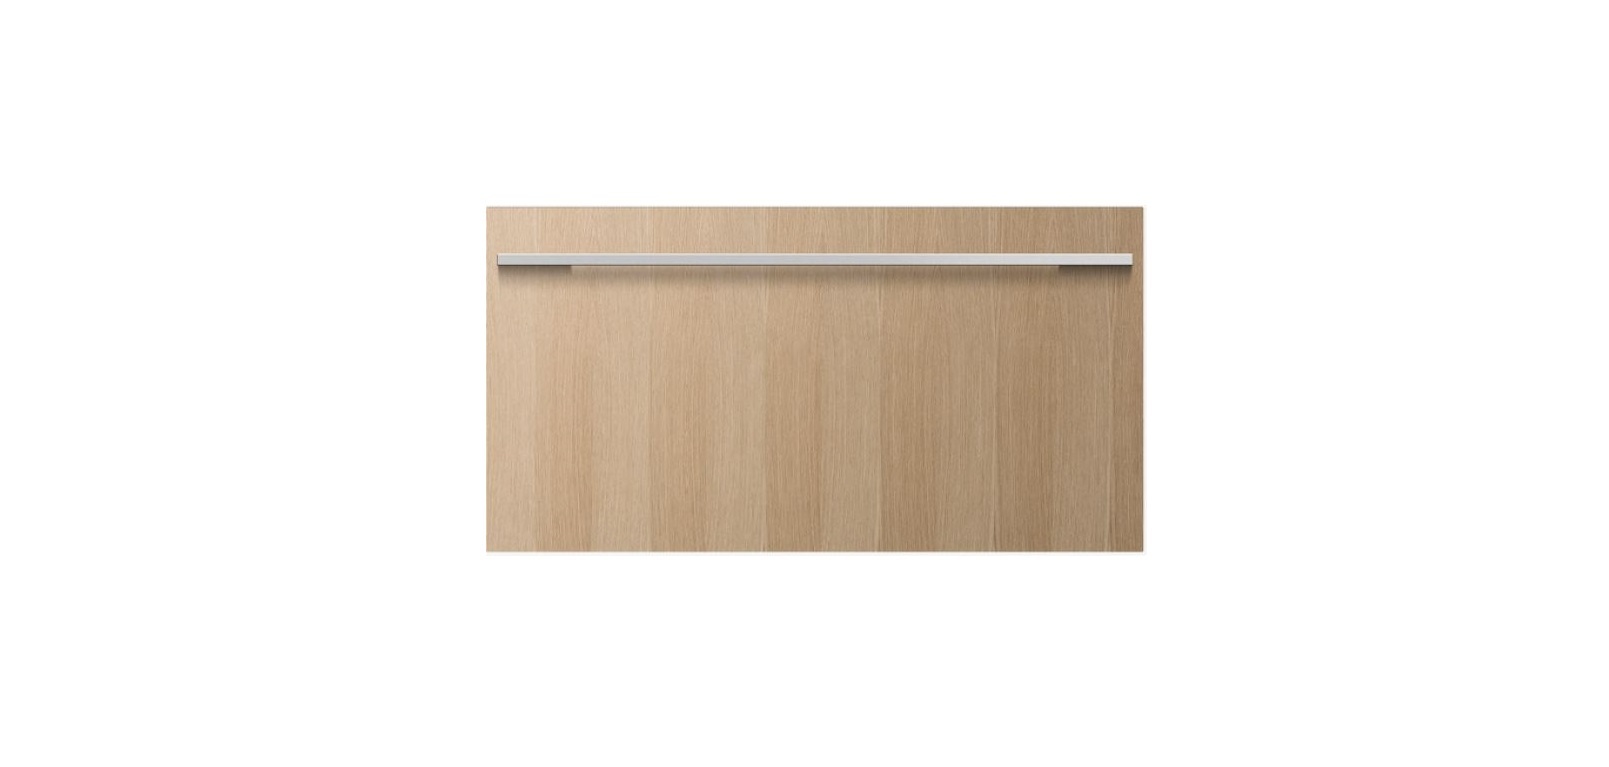 RB90S64MKIW1 Integrated Cool Drawer Multi-Temperature Drawer